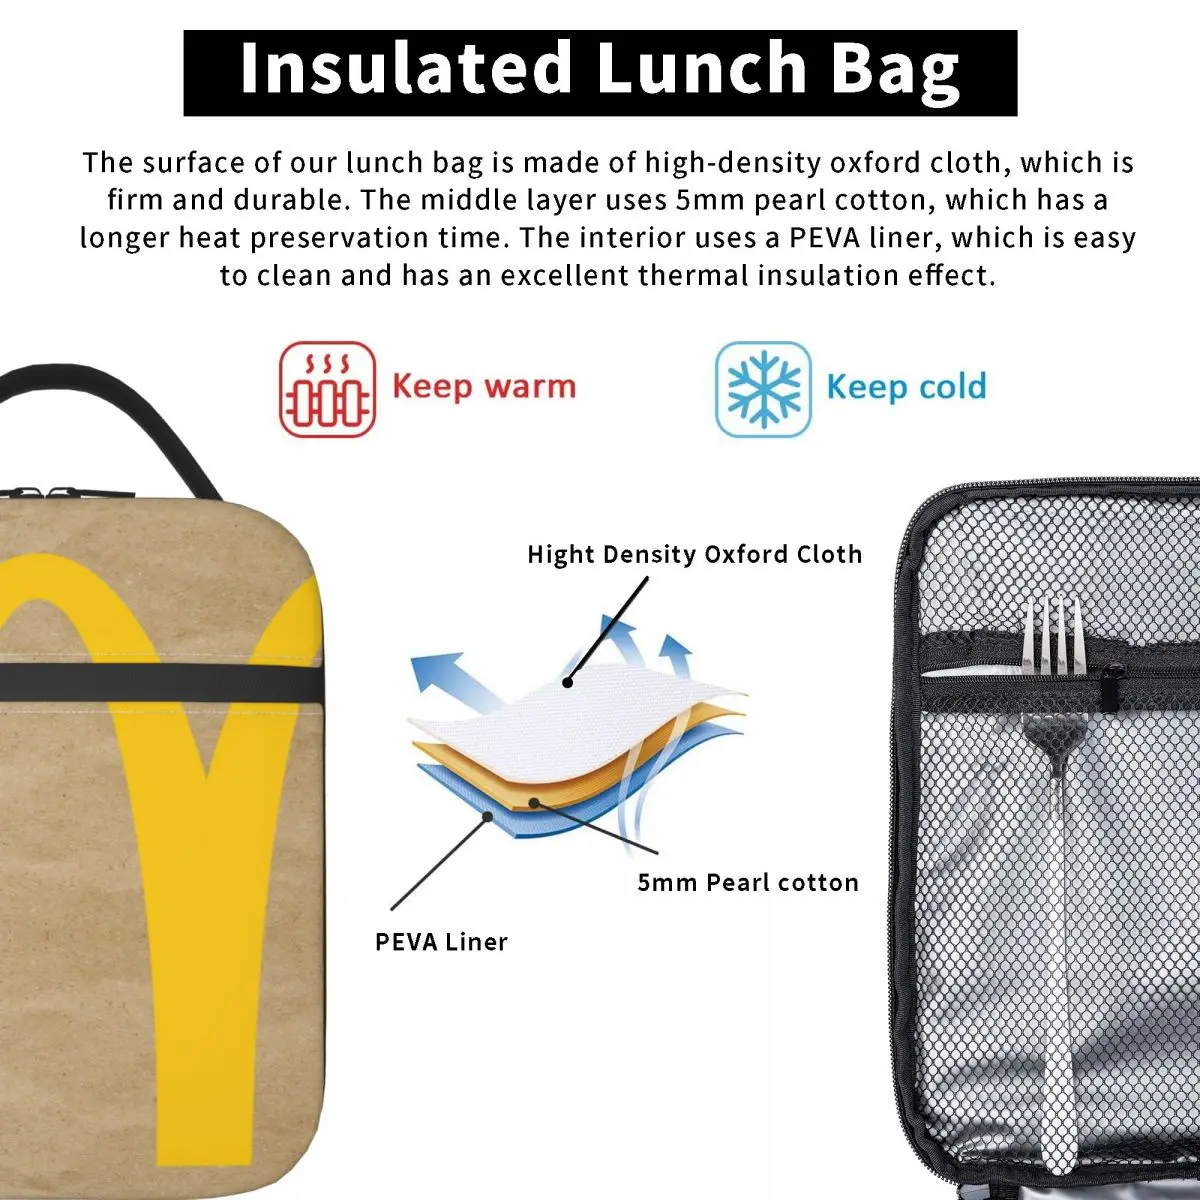 Funny I'm Lovin Eat Thermal Insulated Lunch Bag New Arrival Bento Box Thermal Cooler Lunch Box Fun Design images - 6